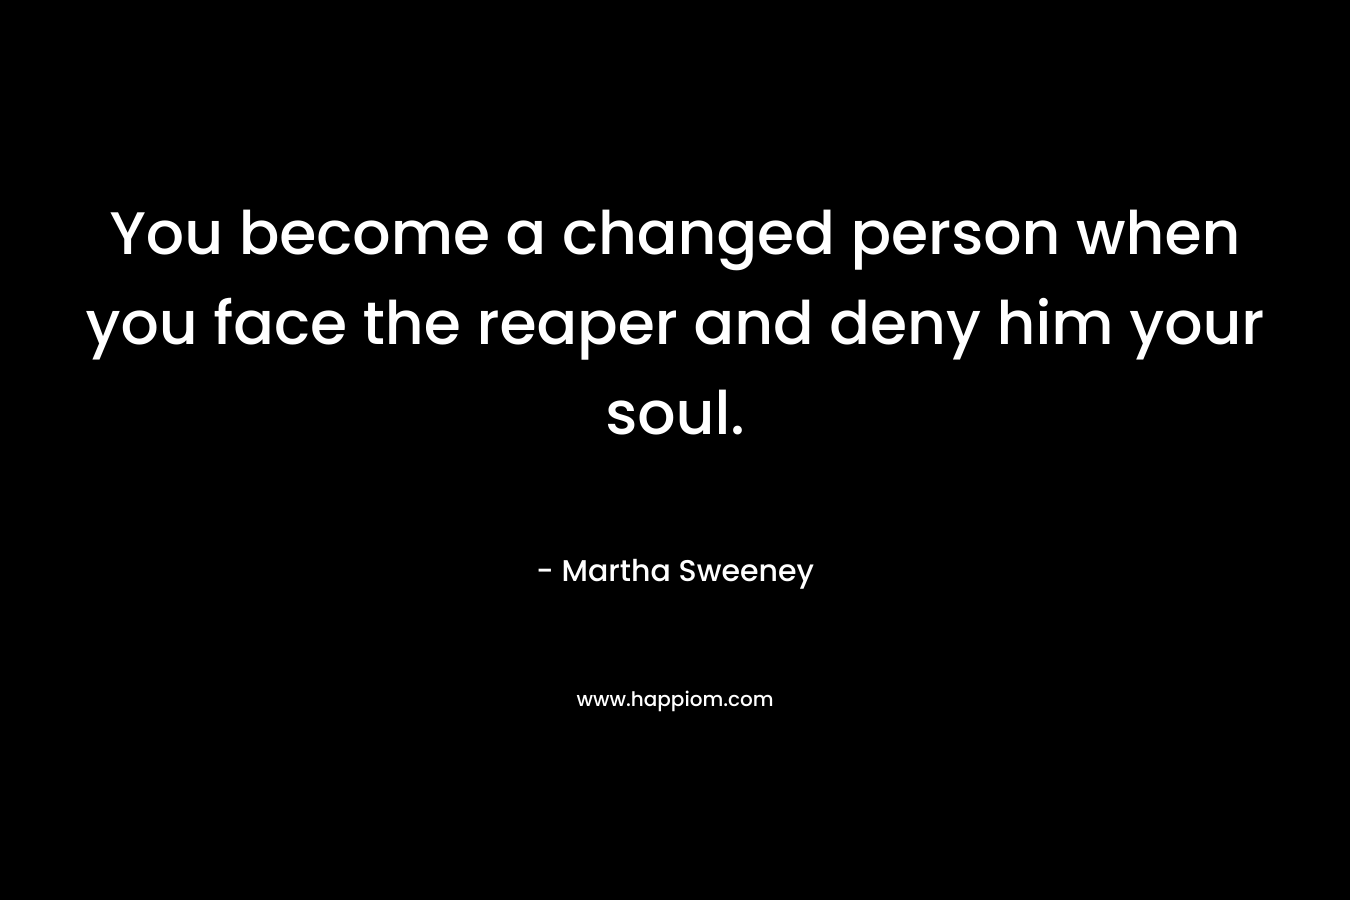 You become a changed person when you face the reaper and deny him your soul. – Martha Sweeney